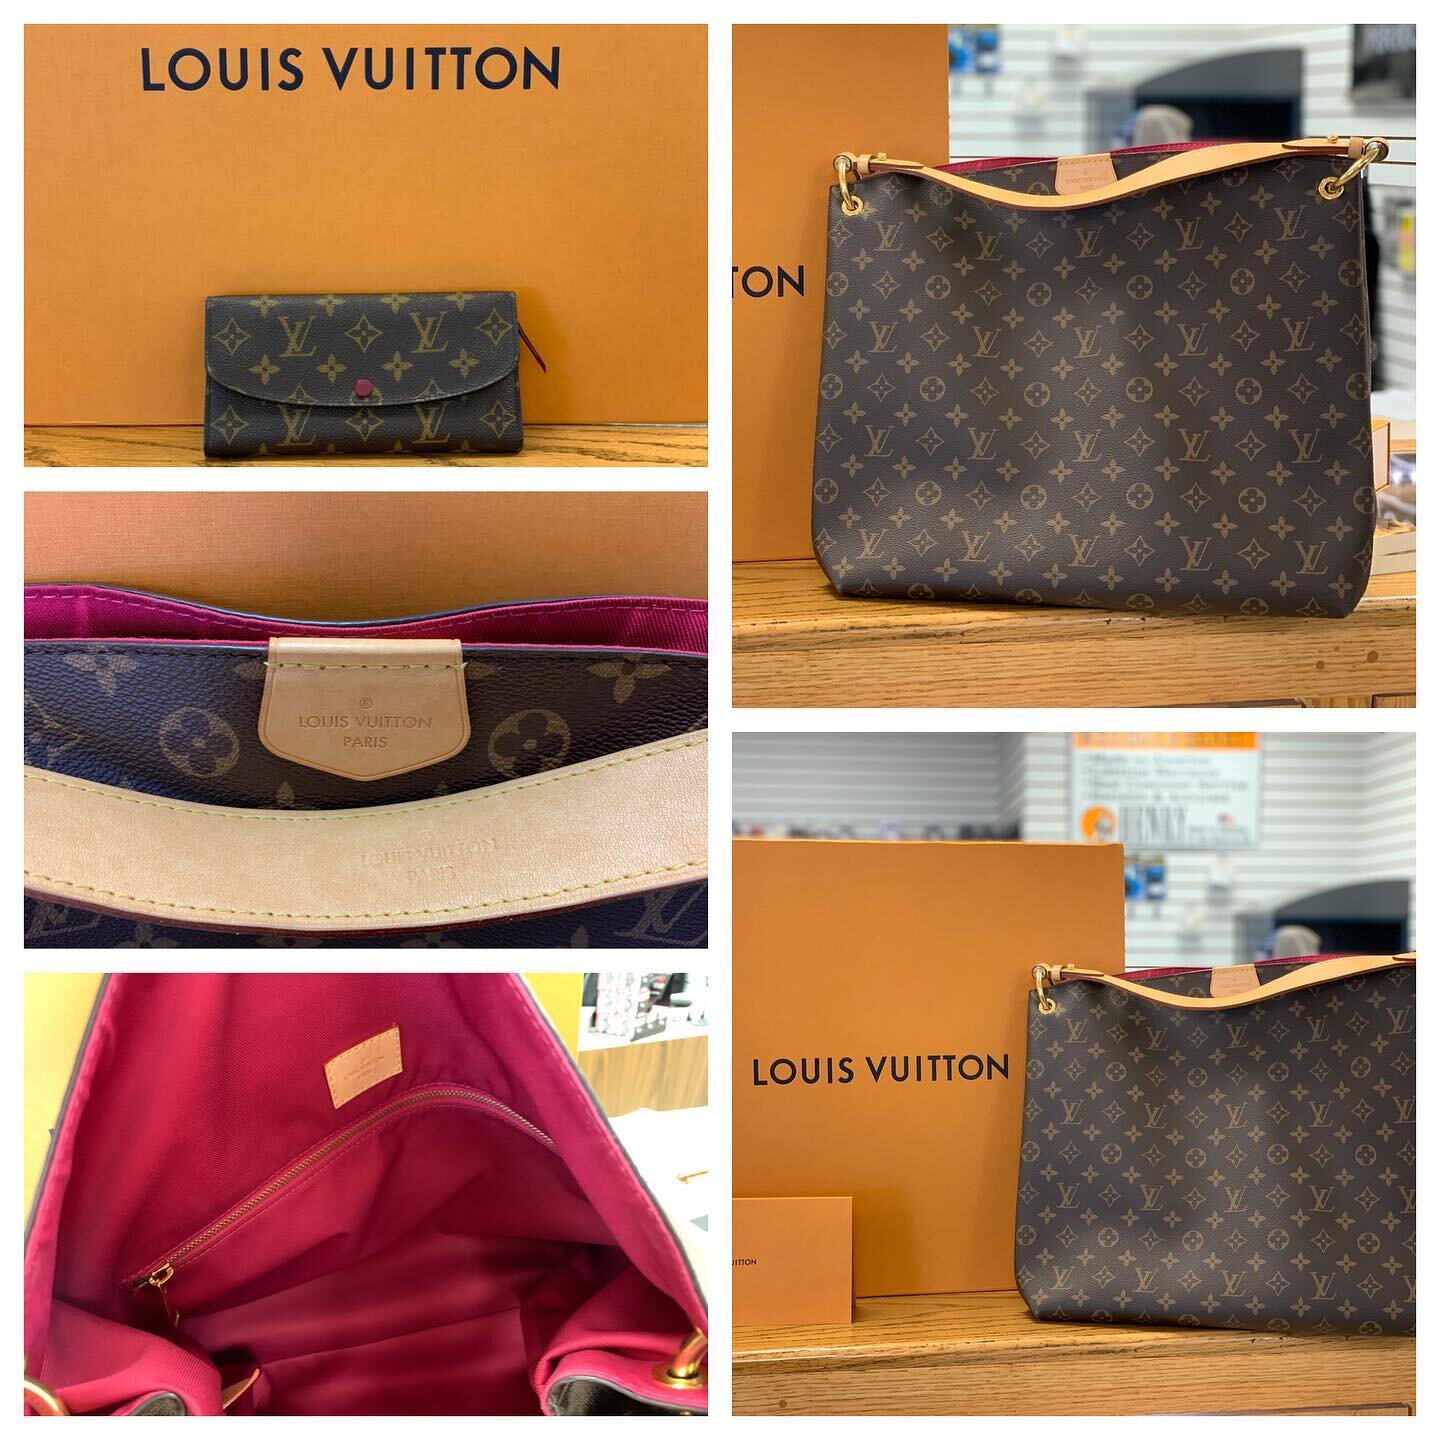 Newly received 2017 Gracefull MM Louis Vuitton handbag.  Complete with dust bag, original receipt, box, ribbon and Entrupy Verified authentic certificate.  Also received a matching Emilie wallet, which is the perfect companion to this bag. #Fayettevi